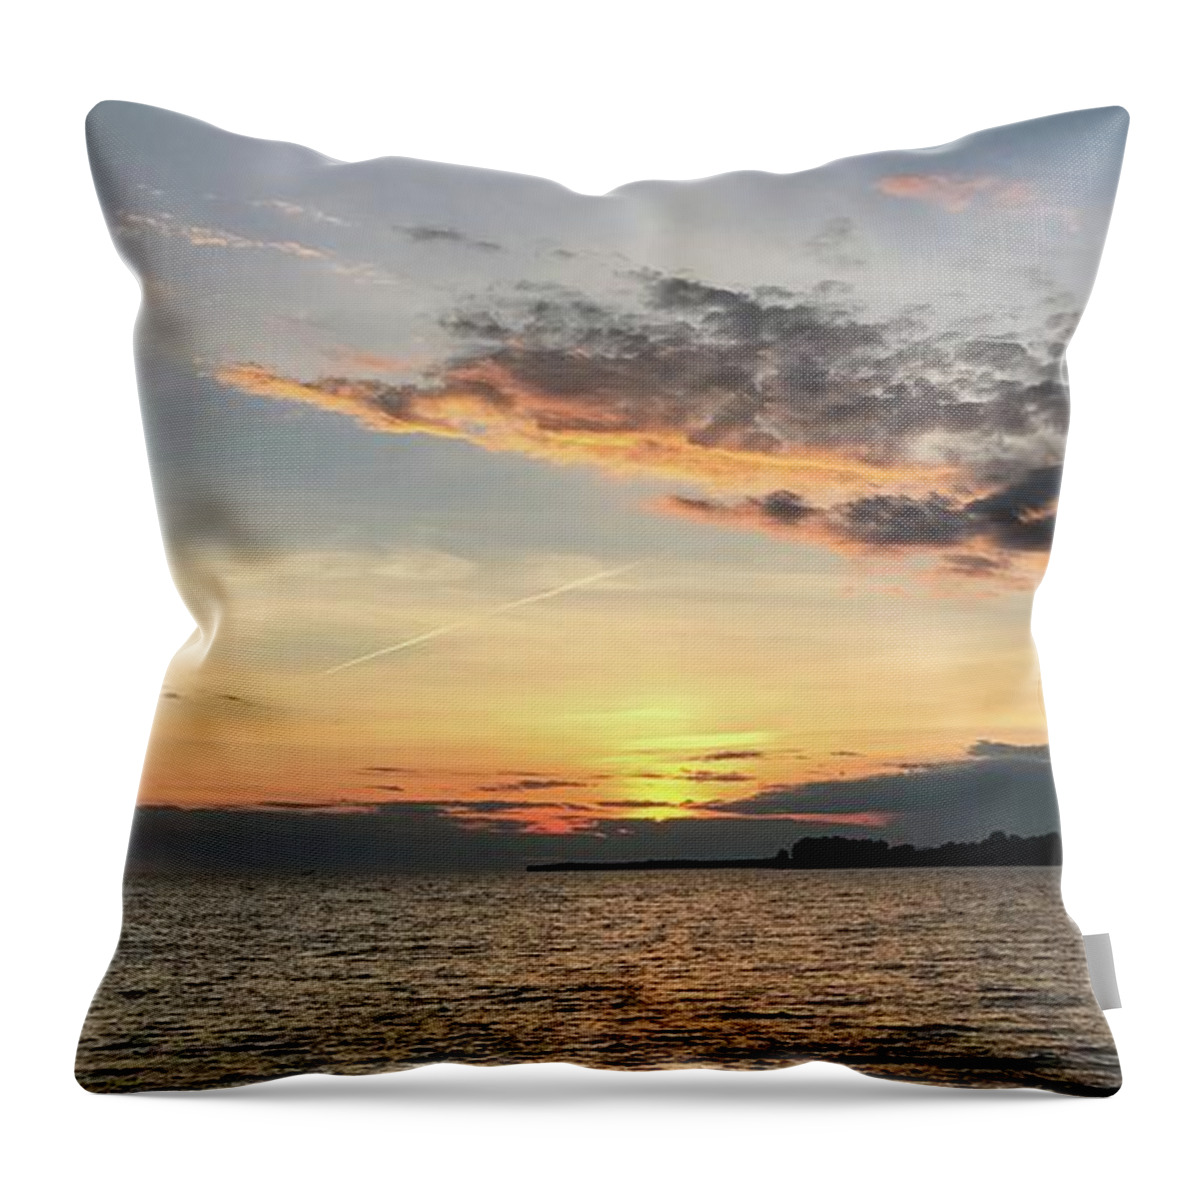 Sunset Throw Pillow featuring the photograph Sunset 4 by Michael Lang